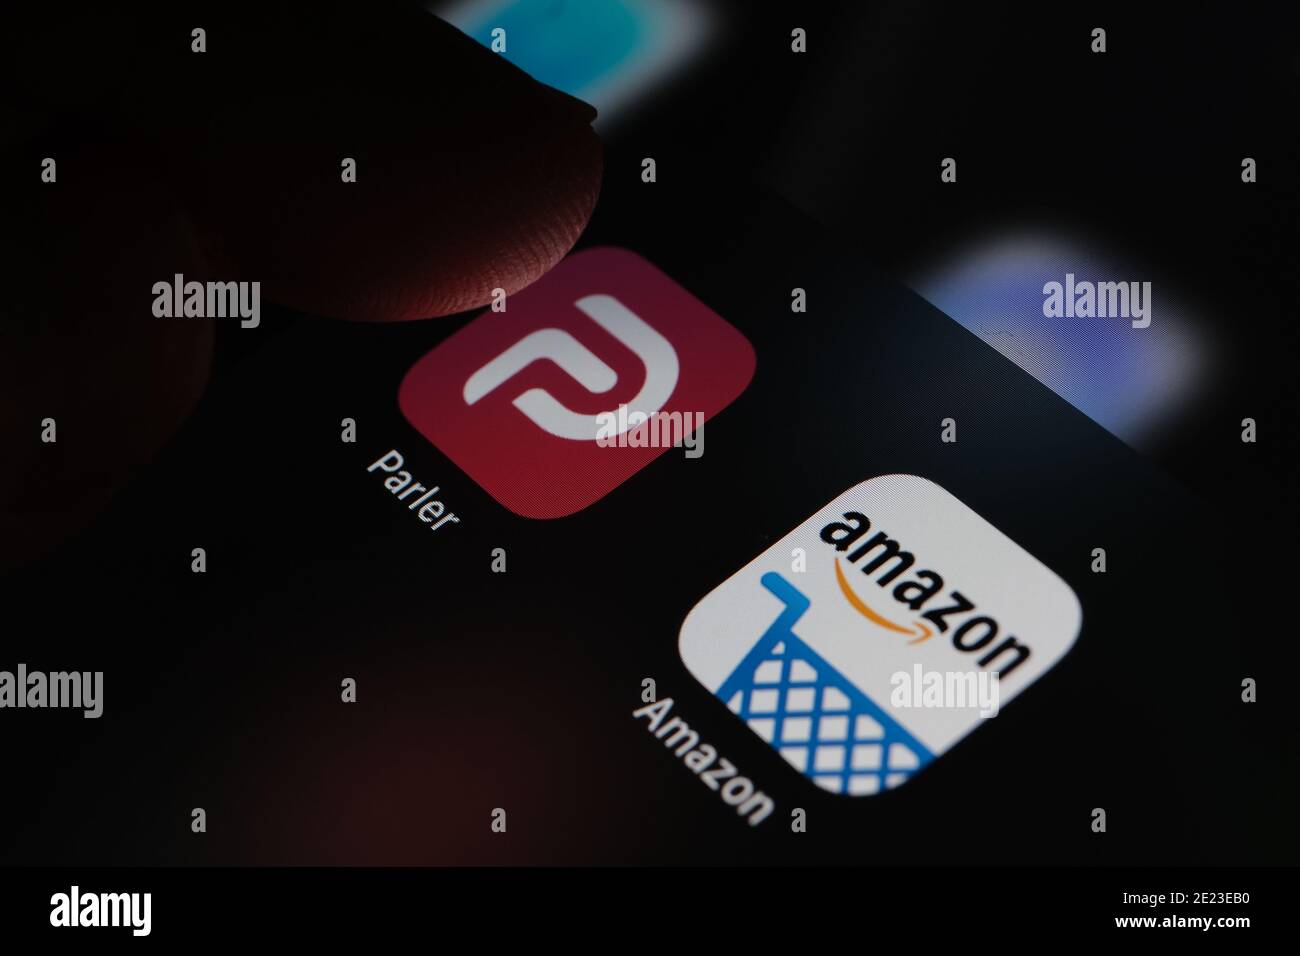 Parler app and Amazon app seen on the screen of iPad. Concept. Parler is a social media platform banned by Amazon AWS. Stock Photo